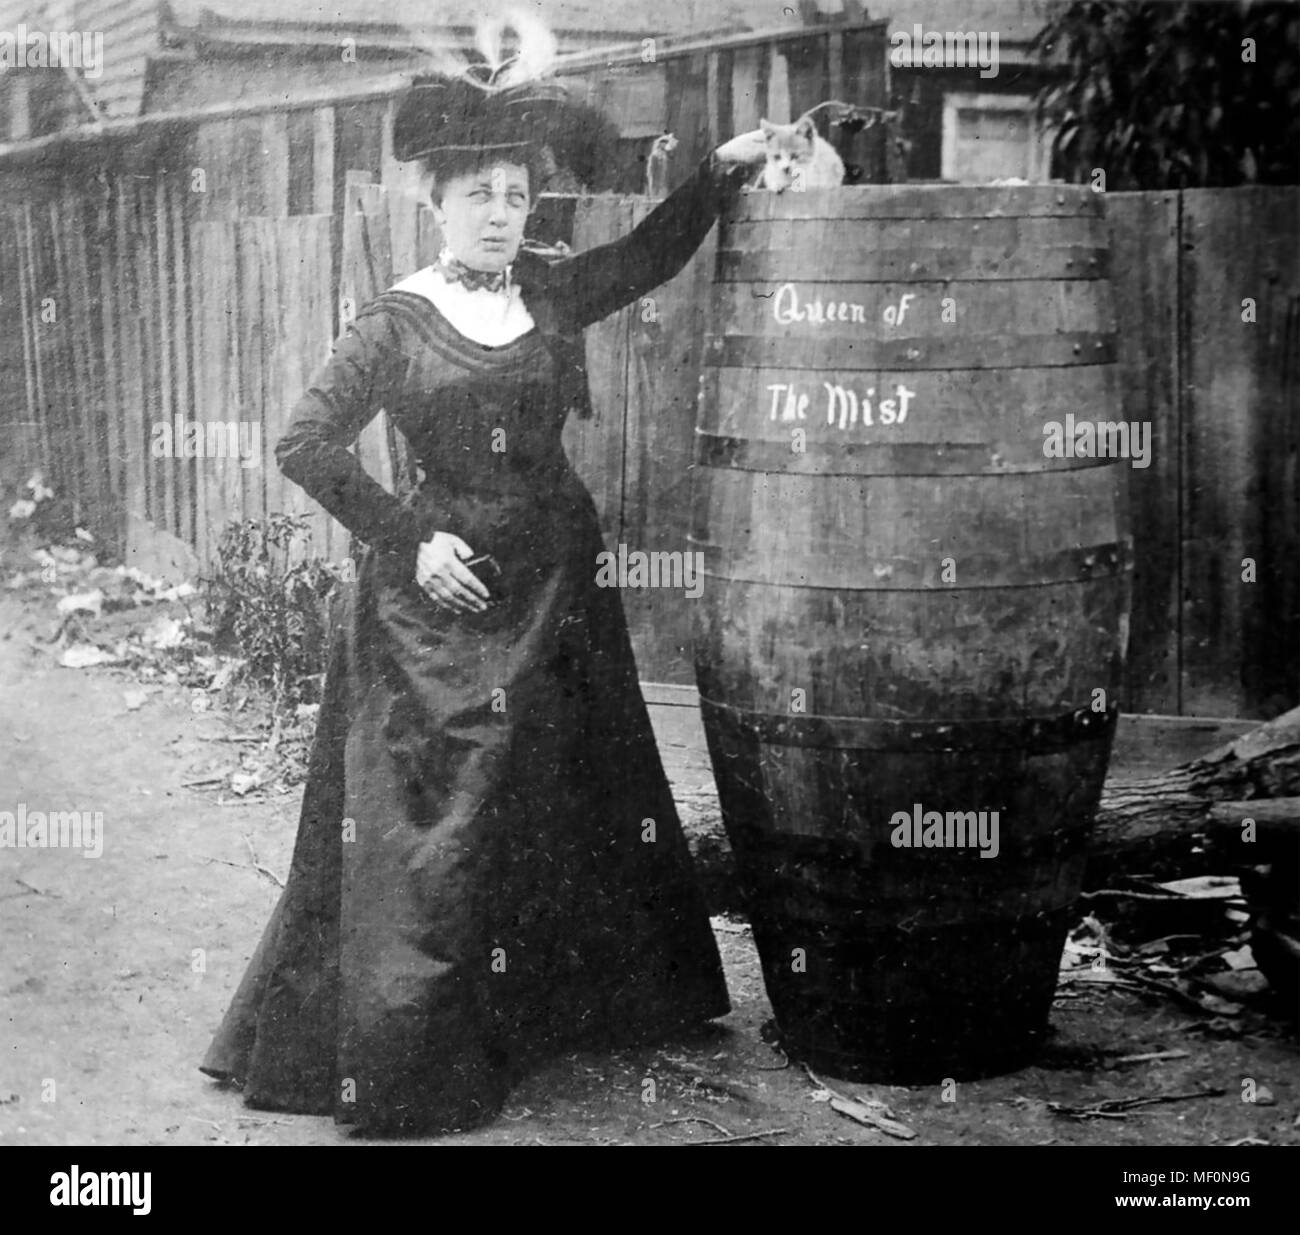 ANNIE EDSON TAYLOR (1838-1921) American schoolteacher who became the first person to survive going over the Niagara Falls in a barrel., a feat she accomplished on her birthday 24 October 1901. Note her cat. Photo: Bains News Service Stock Photo